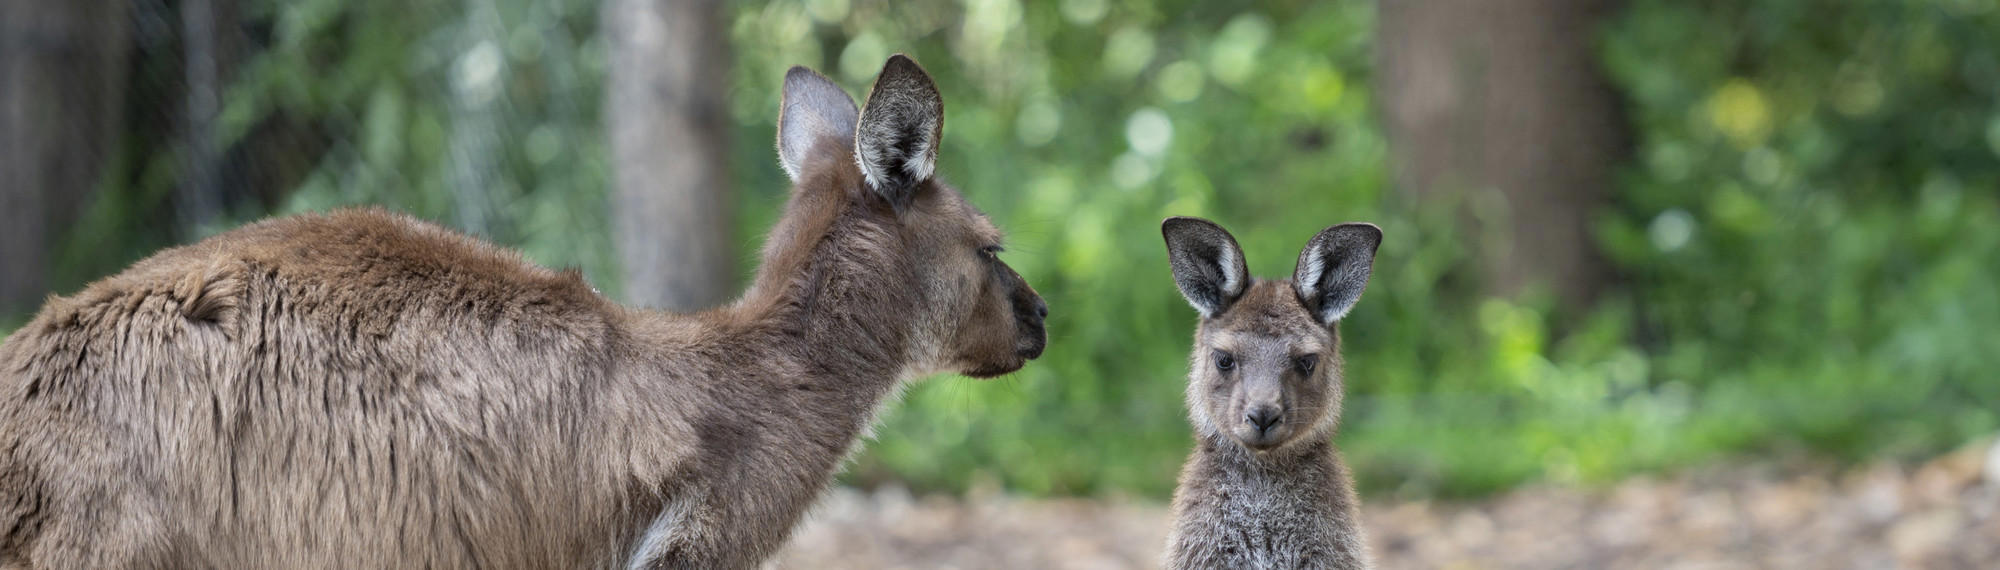 Kangaroo Joey Standing On Hind Legs Next To Mother Looking At Camera 